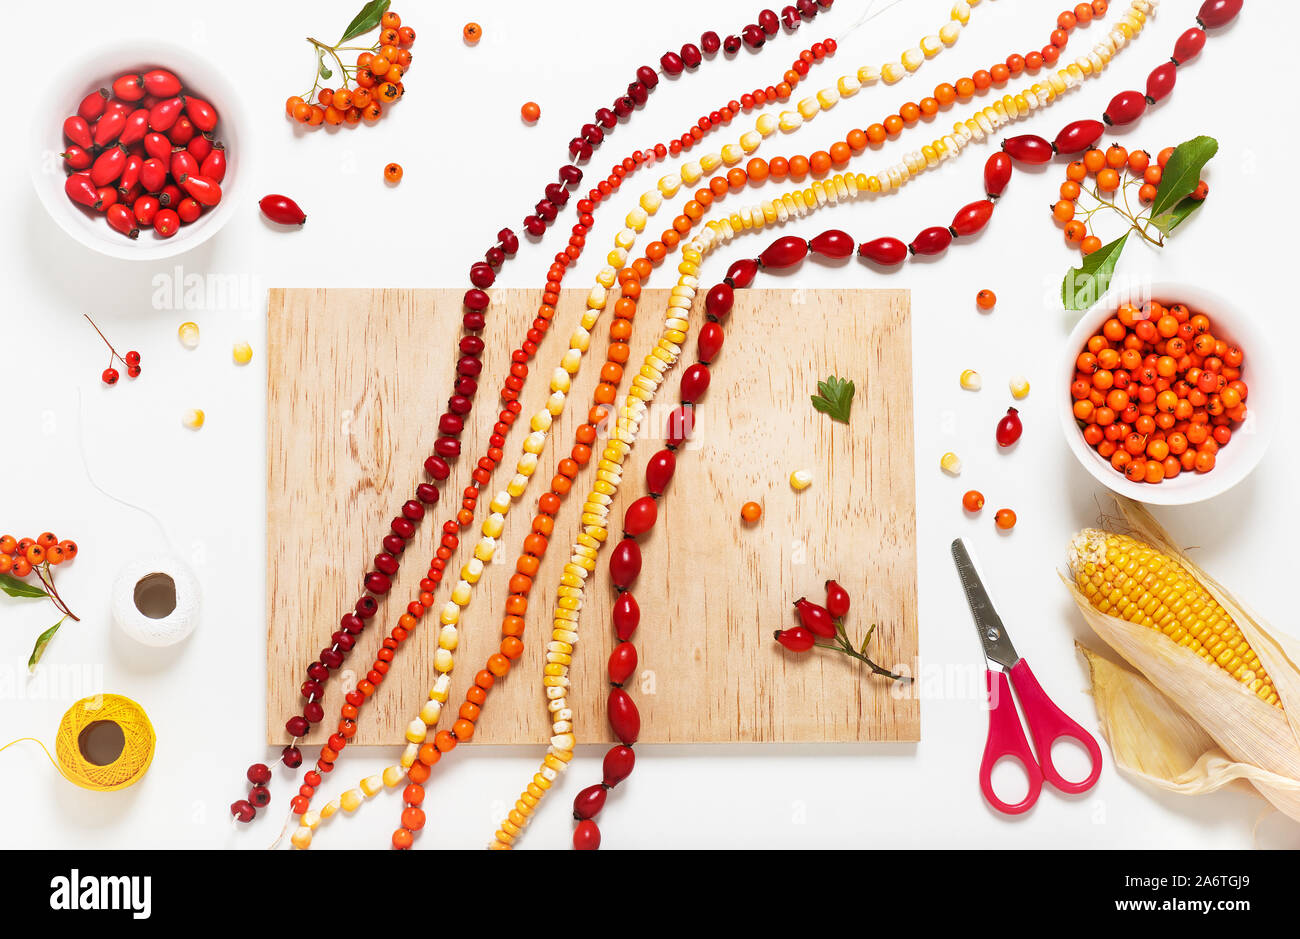 Colorful necklaces made from rose hips, fire thorn berries and corn seeds as crafts for kids. Stock Photo